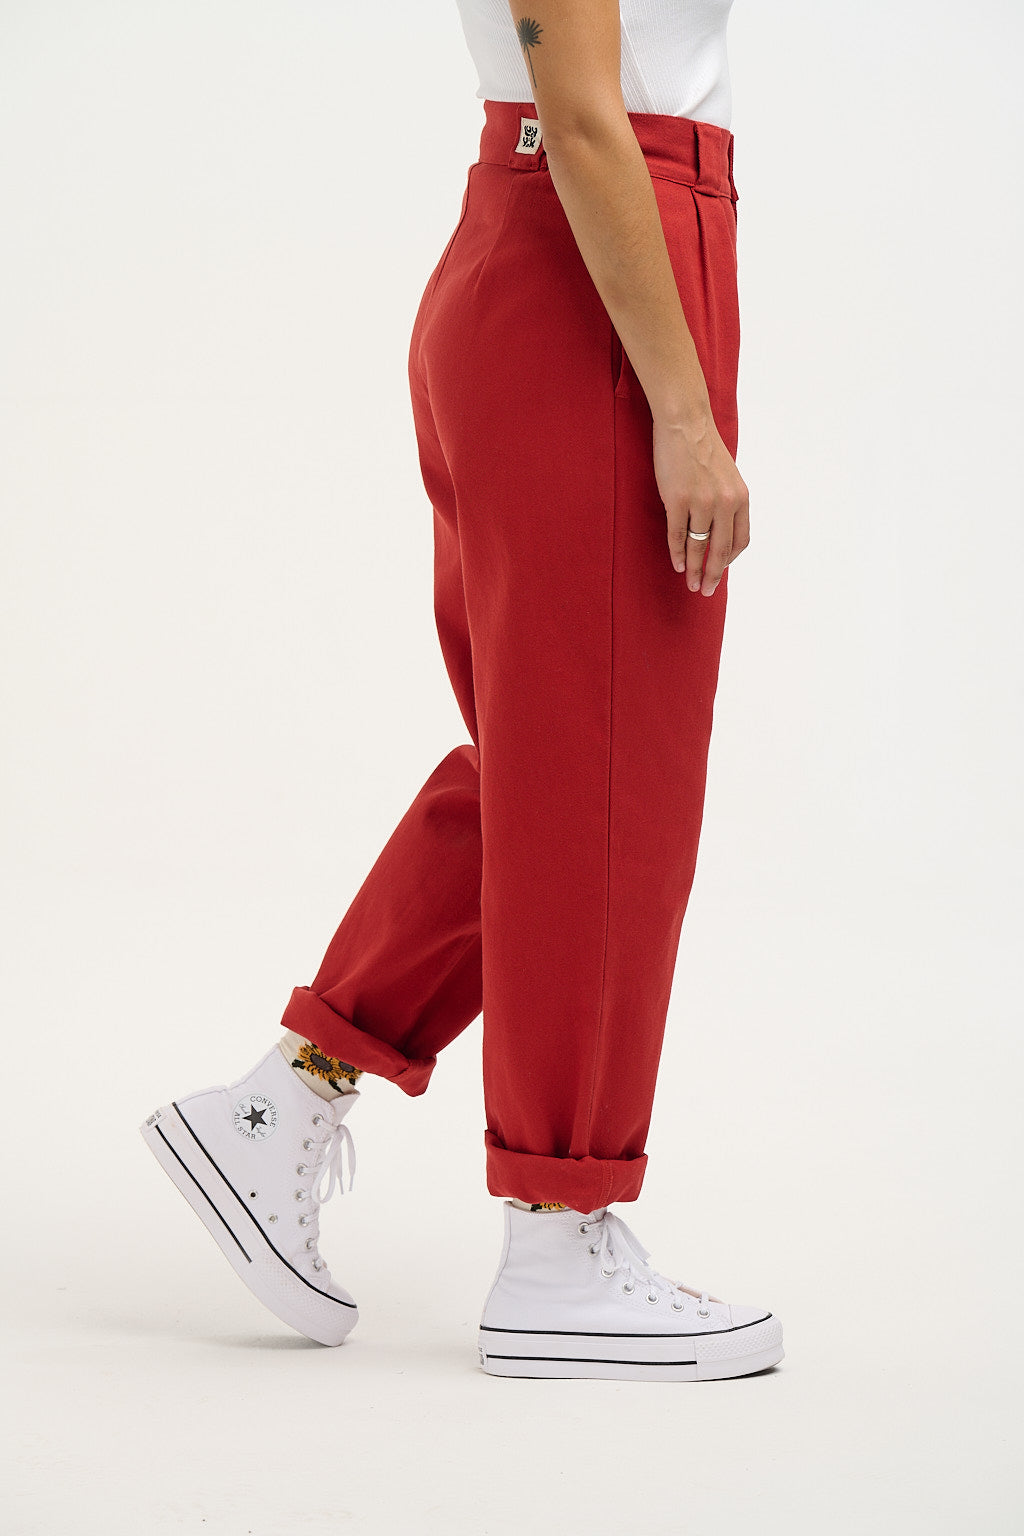 Buy Red Trousers & Pants for Women by Go Colors Online | Ajio.com